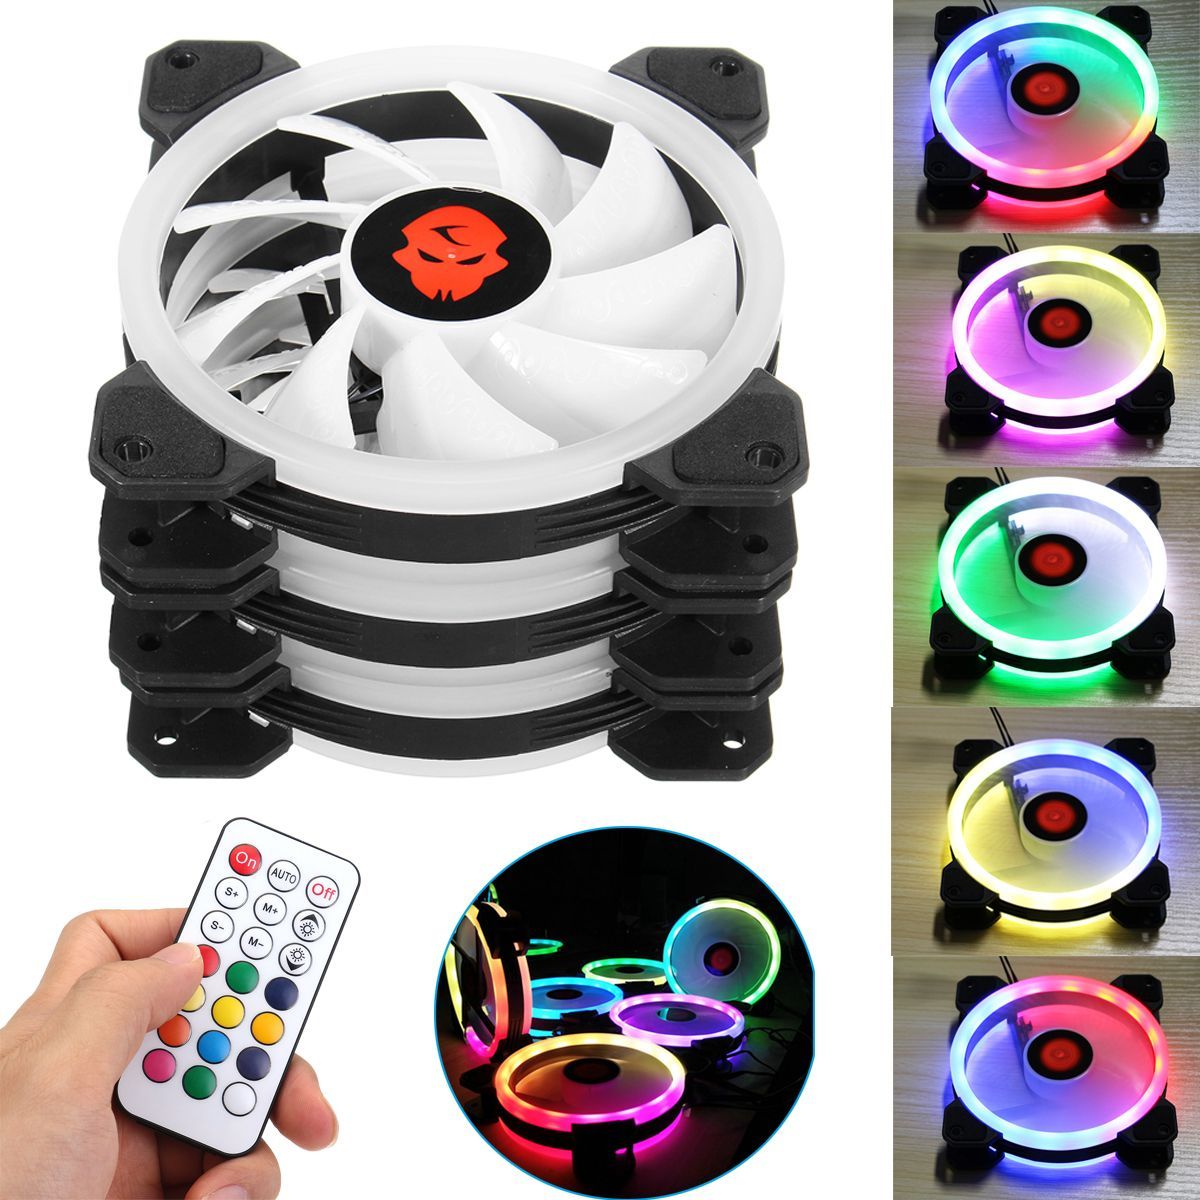 Coolmoon-3PCS-120mm-Adjustable-RGB-LED-Light-Computer-Case-PC-Cooling-Fan-with-Remote-1216398